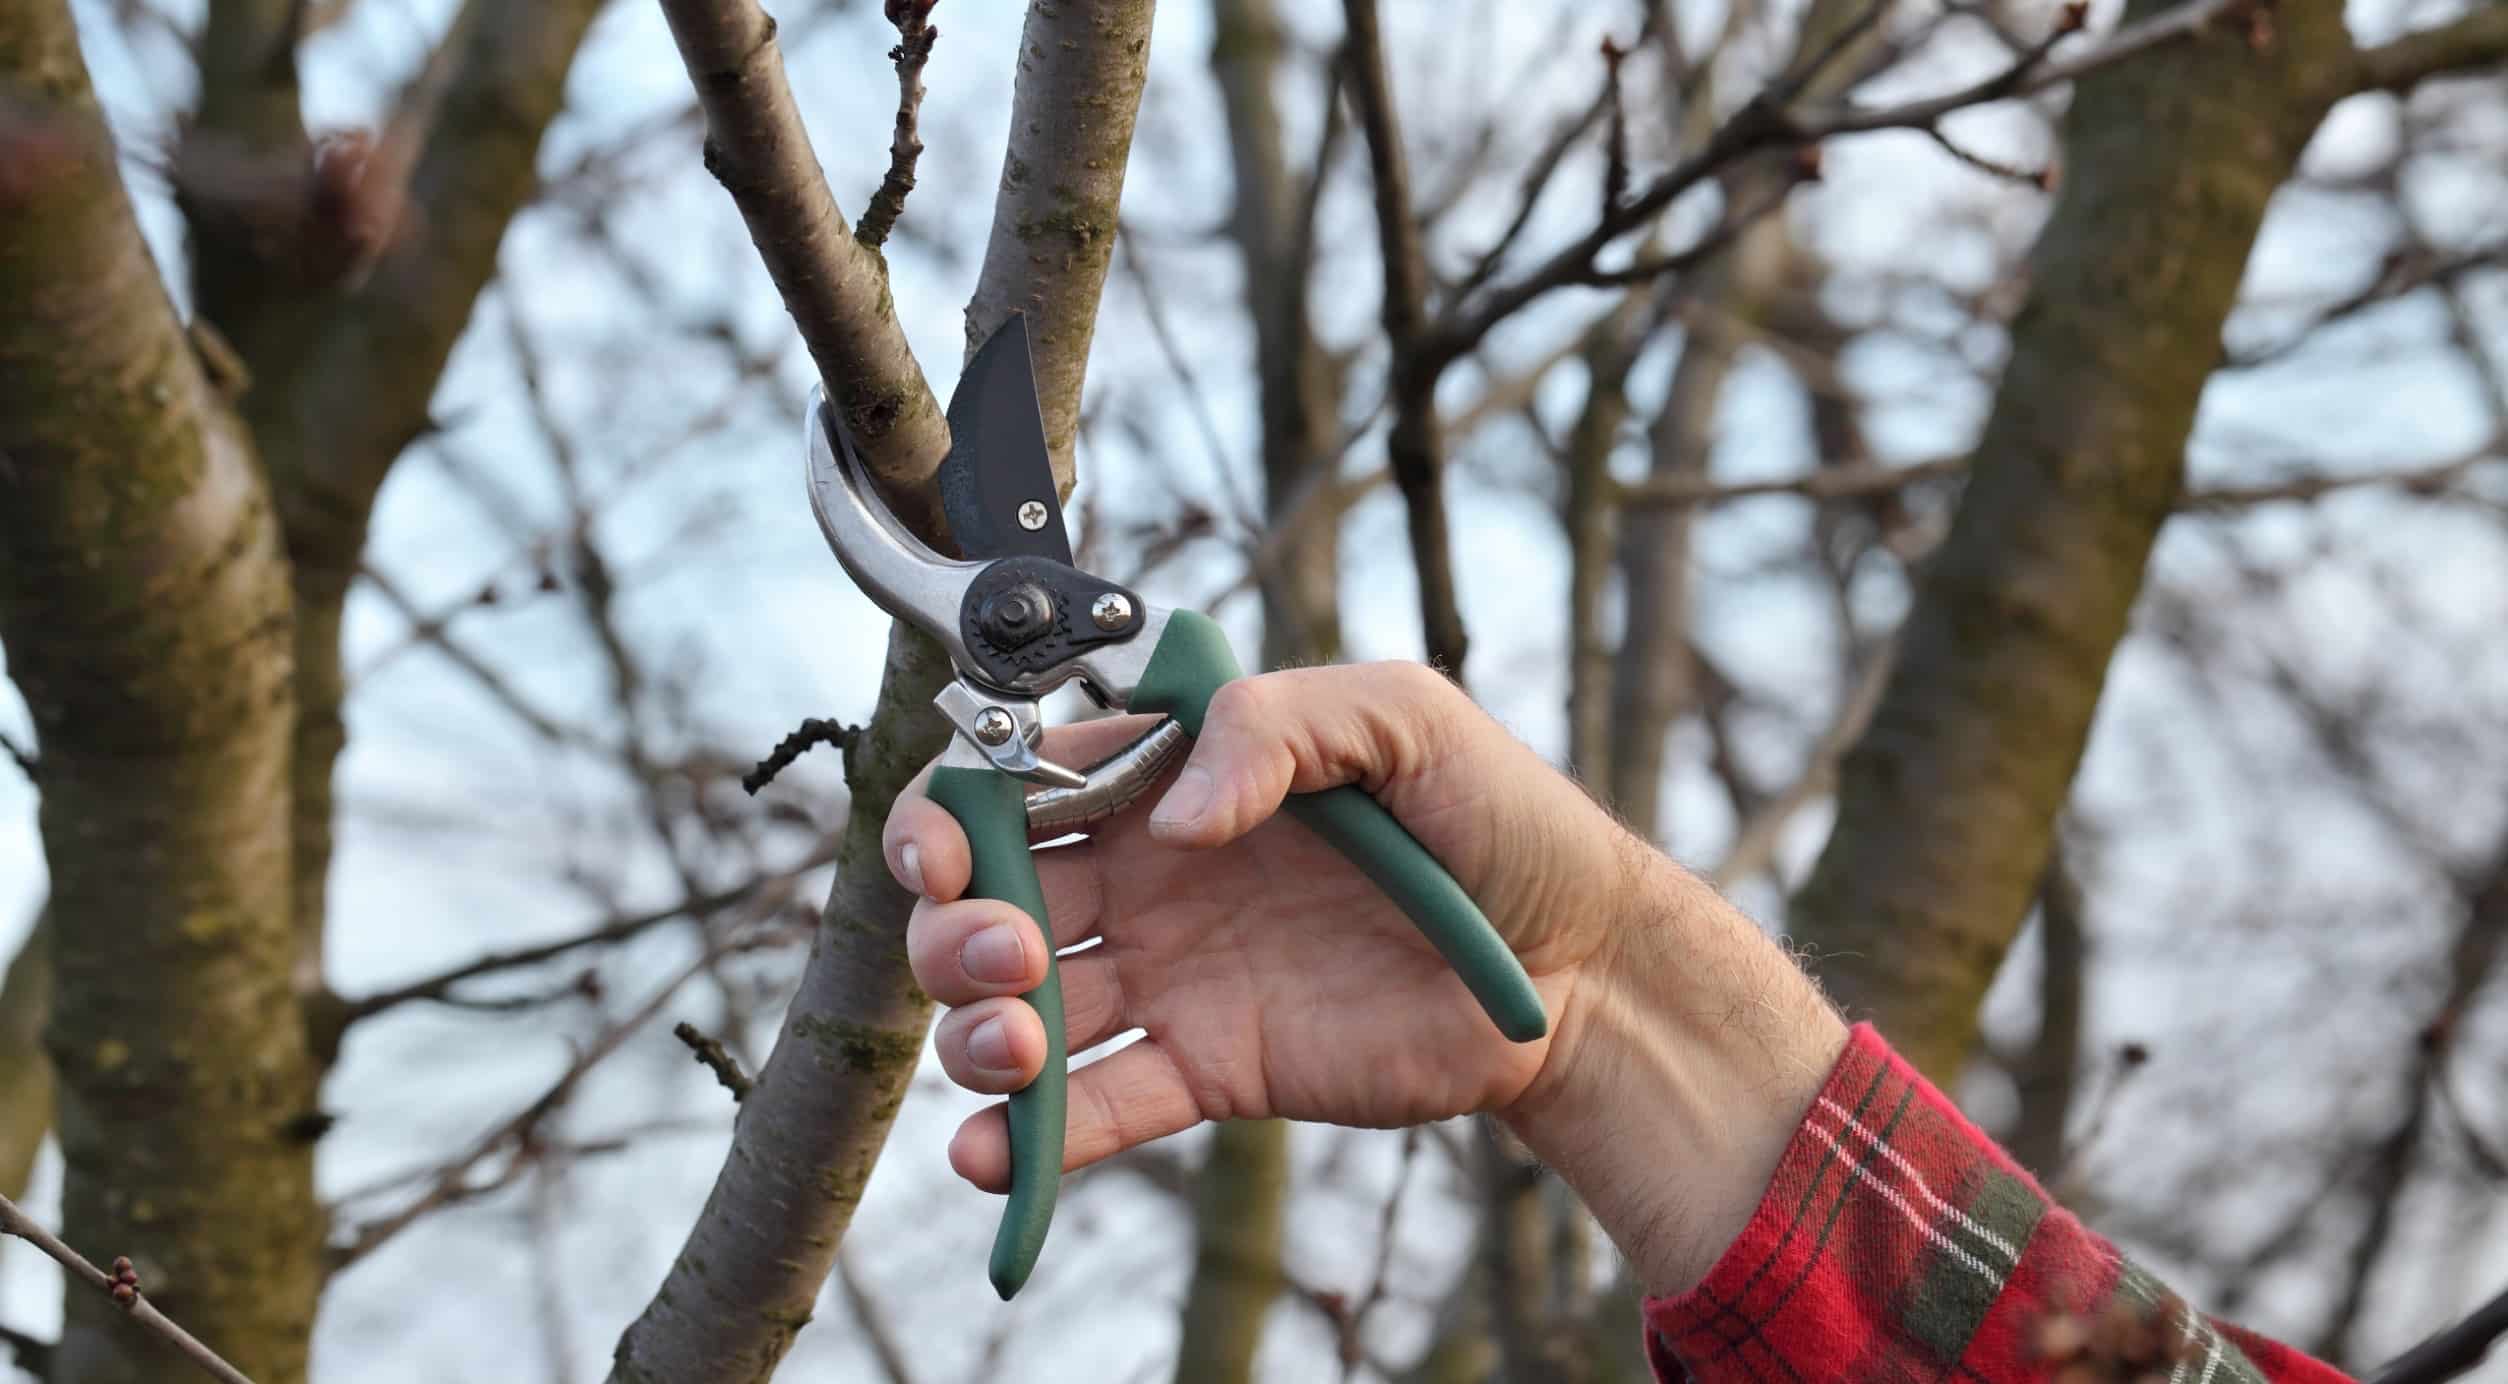 Worker trimming a tree with hand sheers